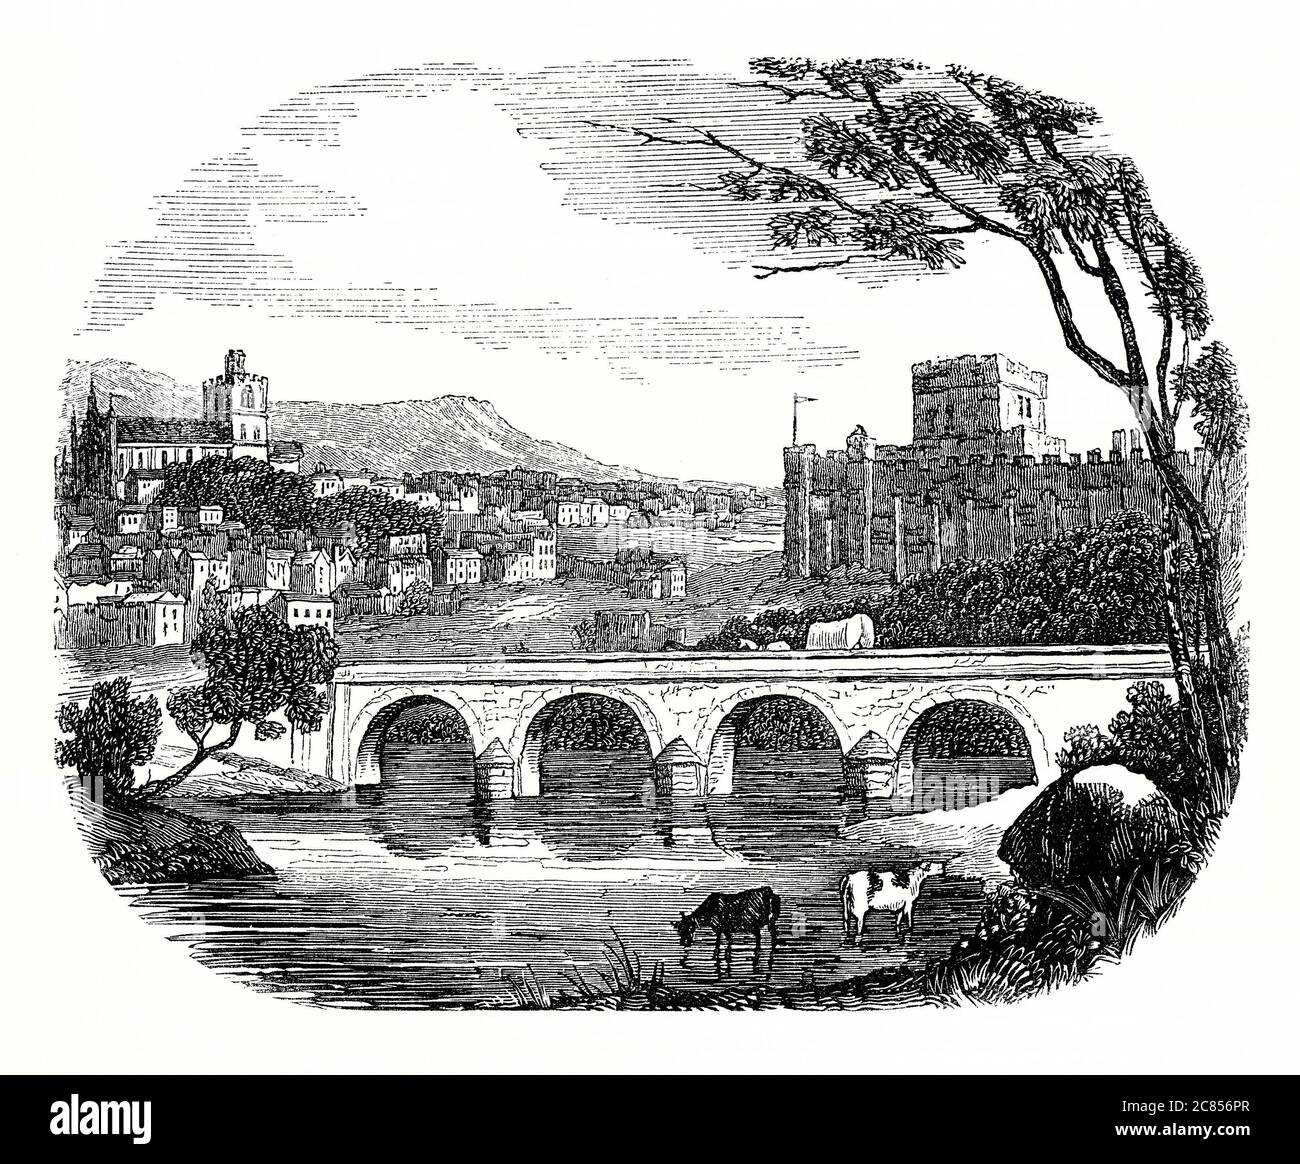 An old engraving of a view of Carlisle in the Middle Ages with its castle (right) and cathedral (left). During the Middle Ages, because of its proximity to the Kingdom of Scotland, Carlisle became an important military stronghold. Carlisle Castle, still relatively intact, was built in 1092 by William Rufus, and once served as a prison for Mary, Queen of Scots. Stock Photo